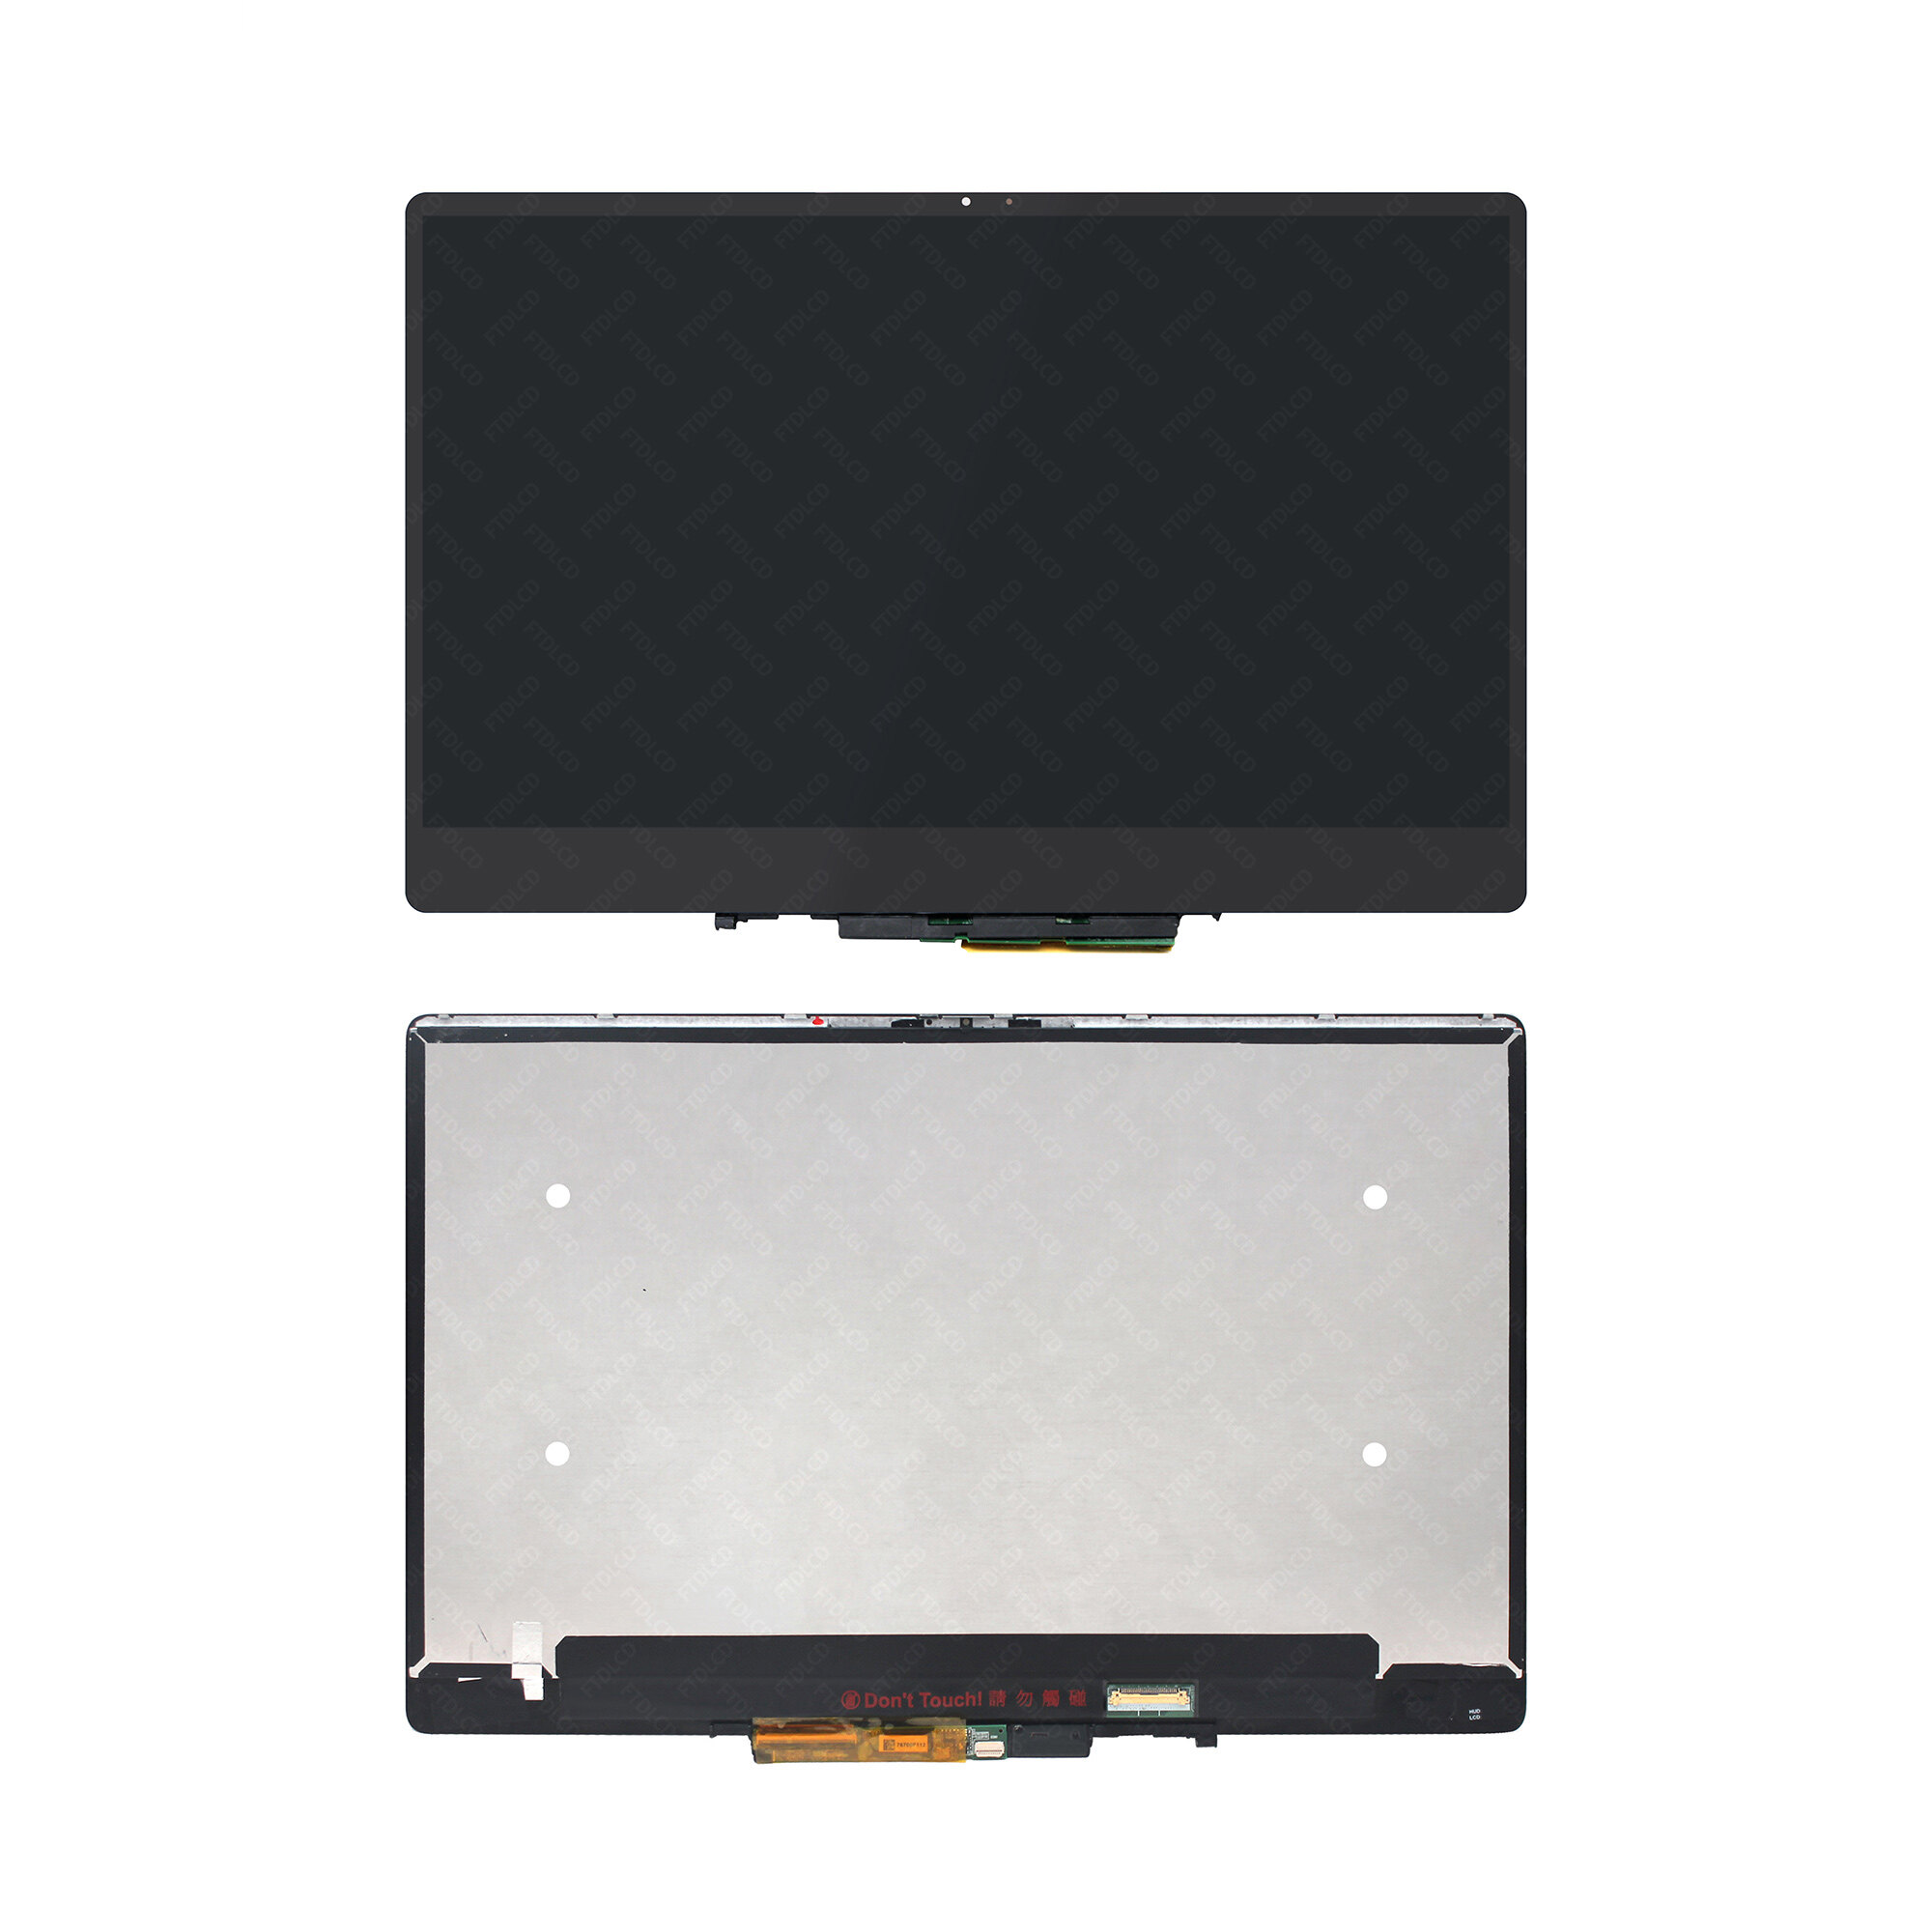 Kreplacement LCD Display Touchscreen Digitizer Assembly for Dell Inspiron 13 7386 N133DCE-GP2